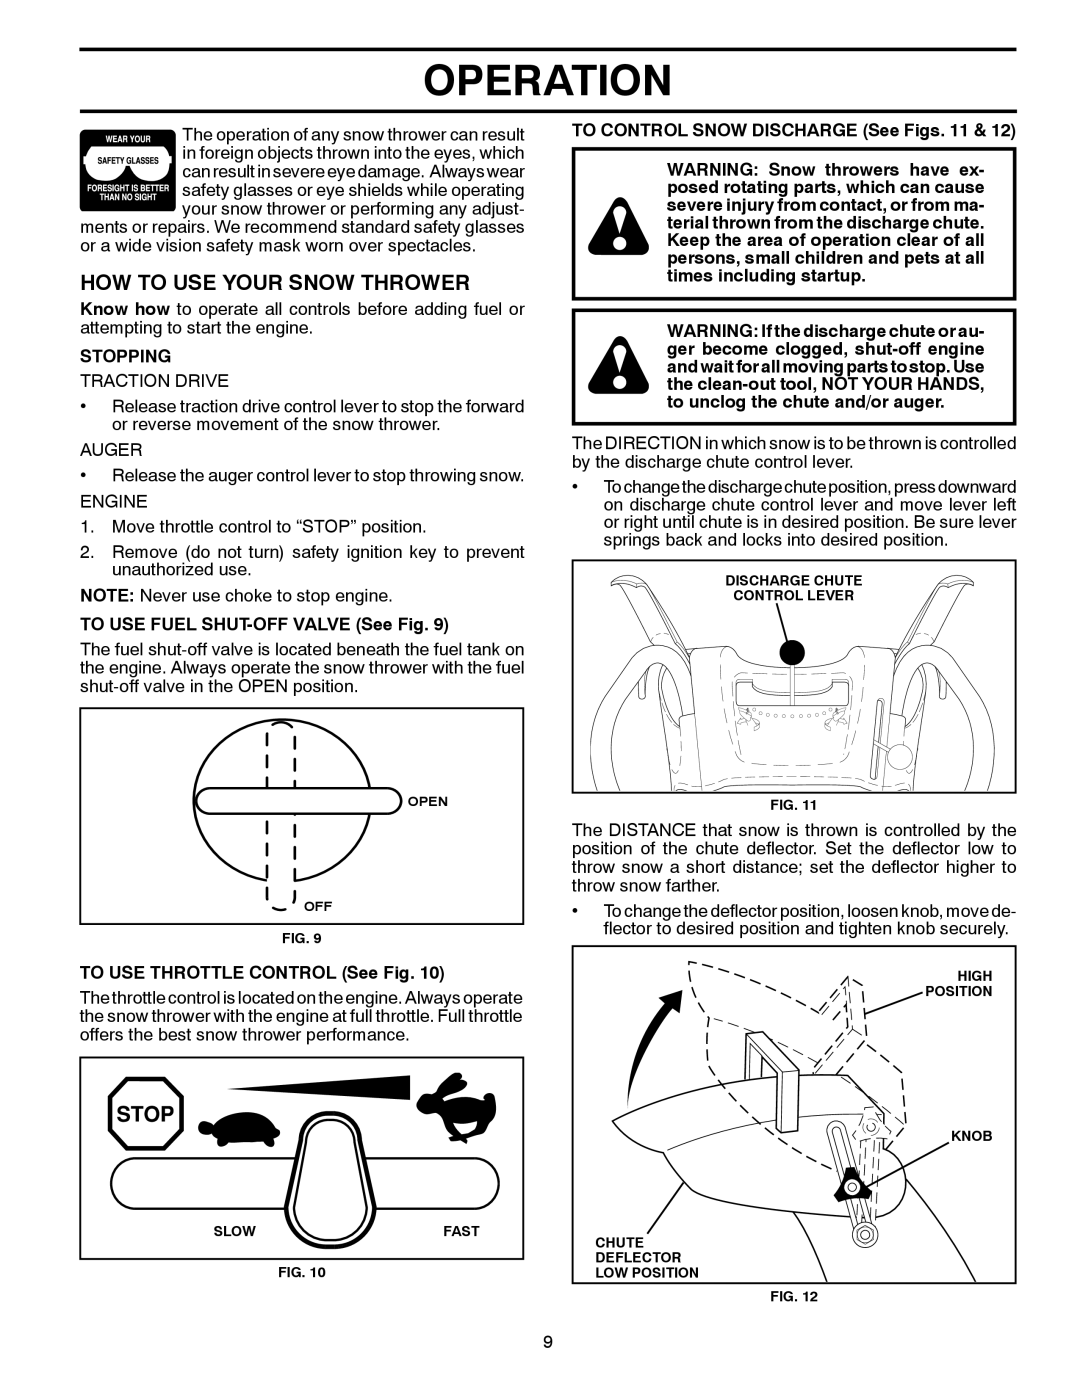 Husqvarna 96193006400, 11527SB manual How To Use Your Snow Thrower, Operation, Stopping, TO USE FUEL SHUT-OFF VALVE See Fig 